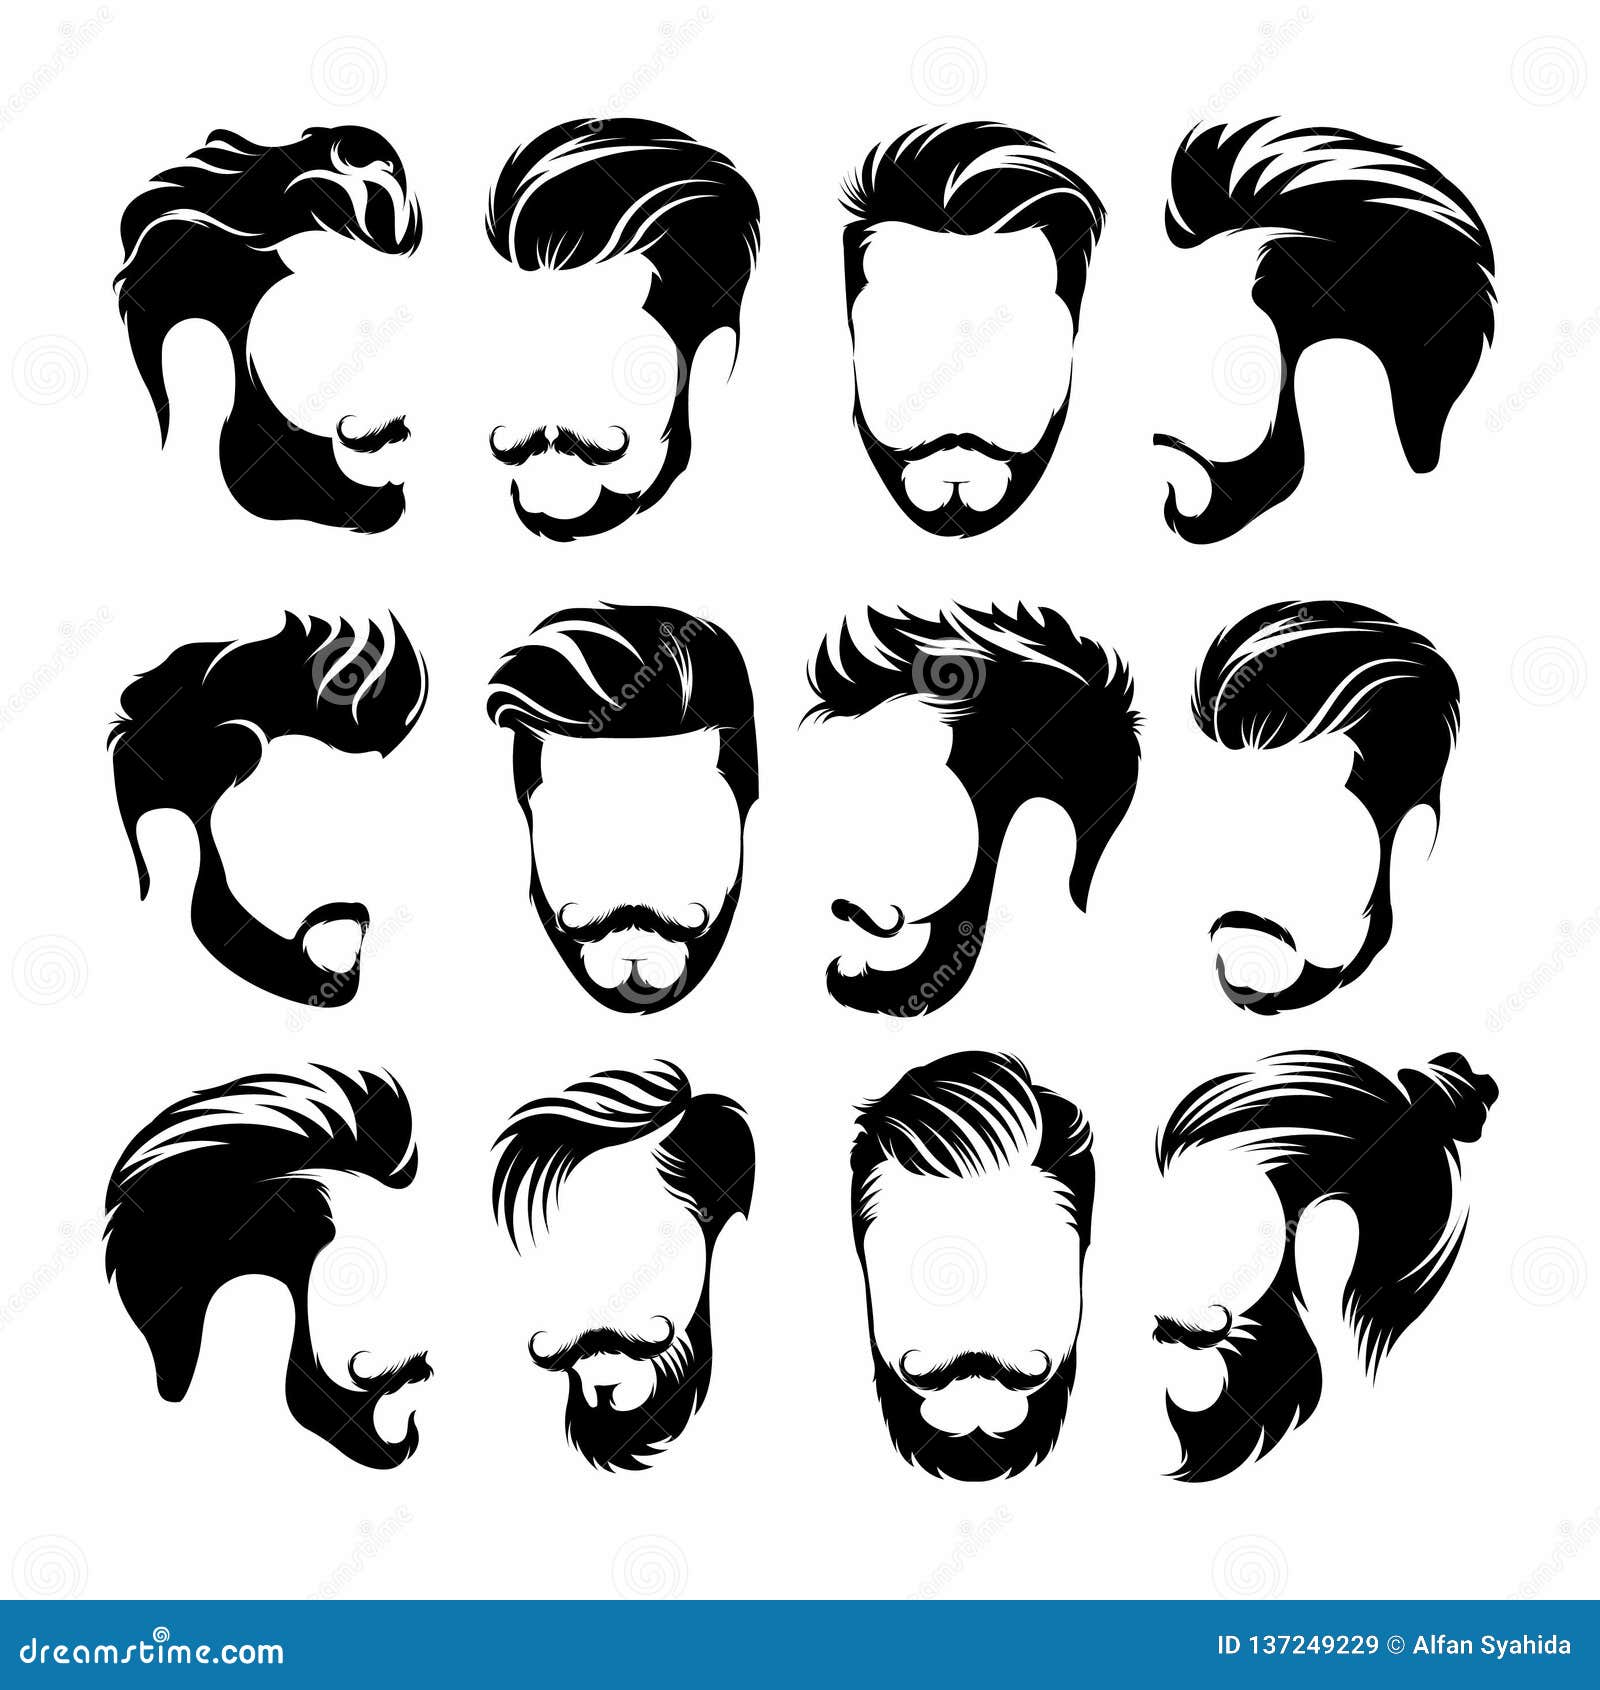 Hipster Hair, Mustaches and Beards. Hipster Style Vector Illustration. -  Vector Stock Illustration - Illustration of love, black: 137249229